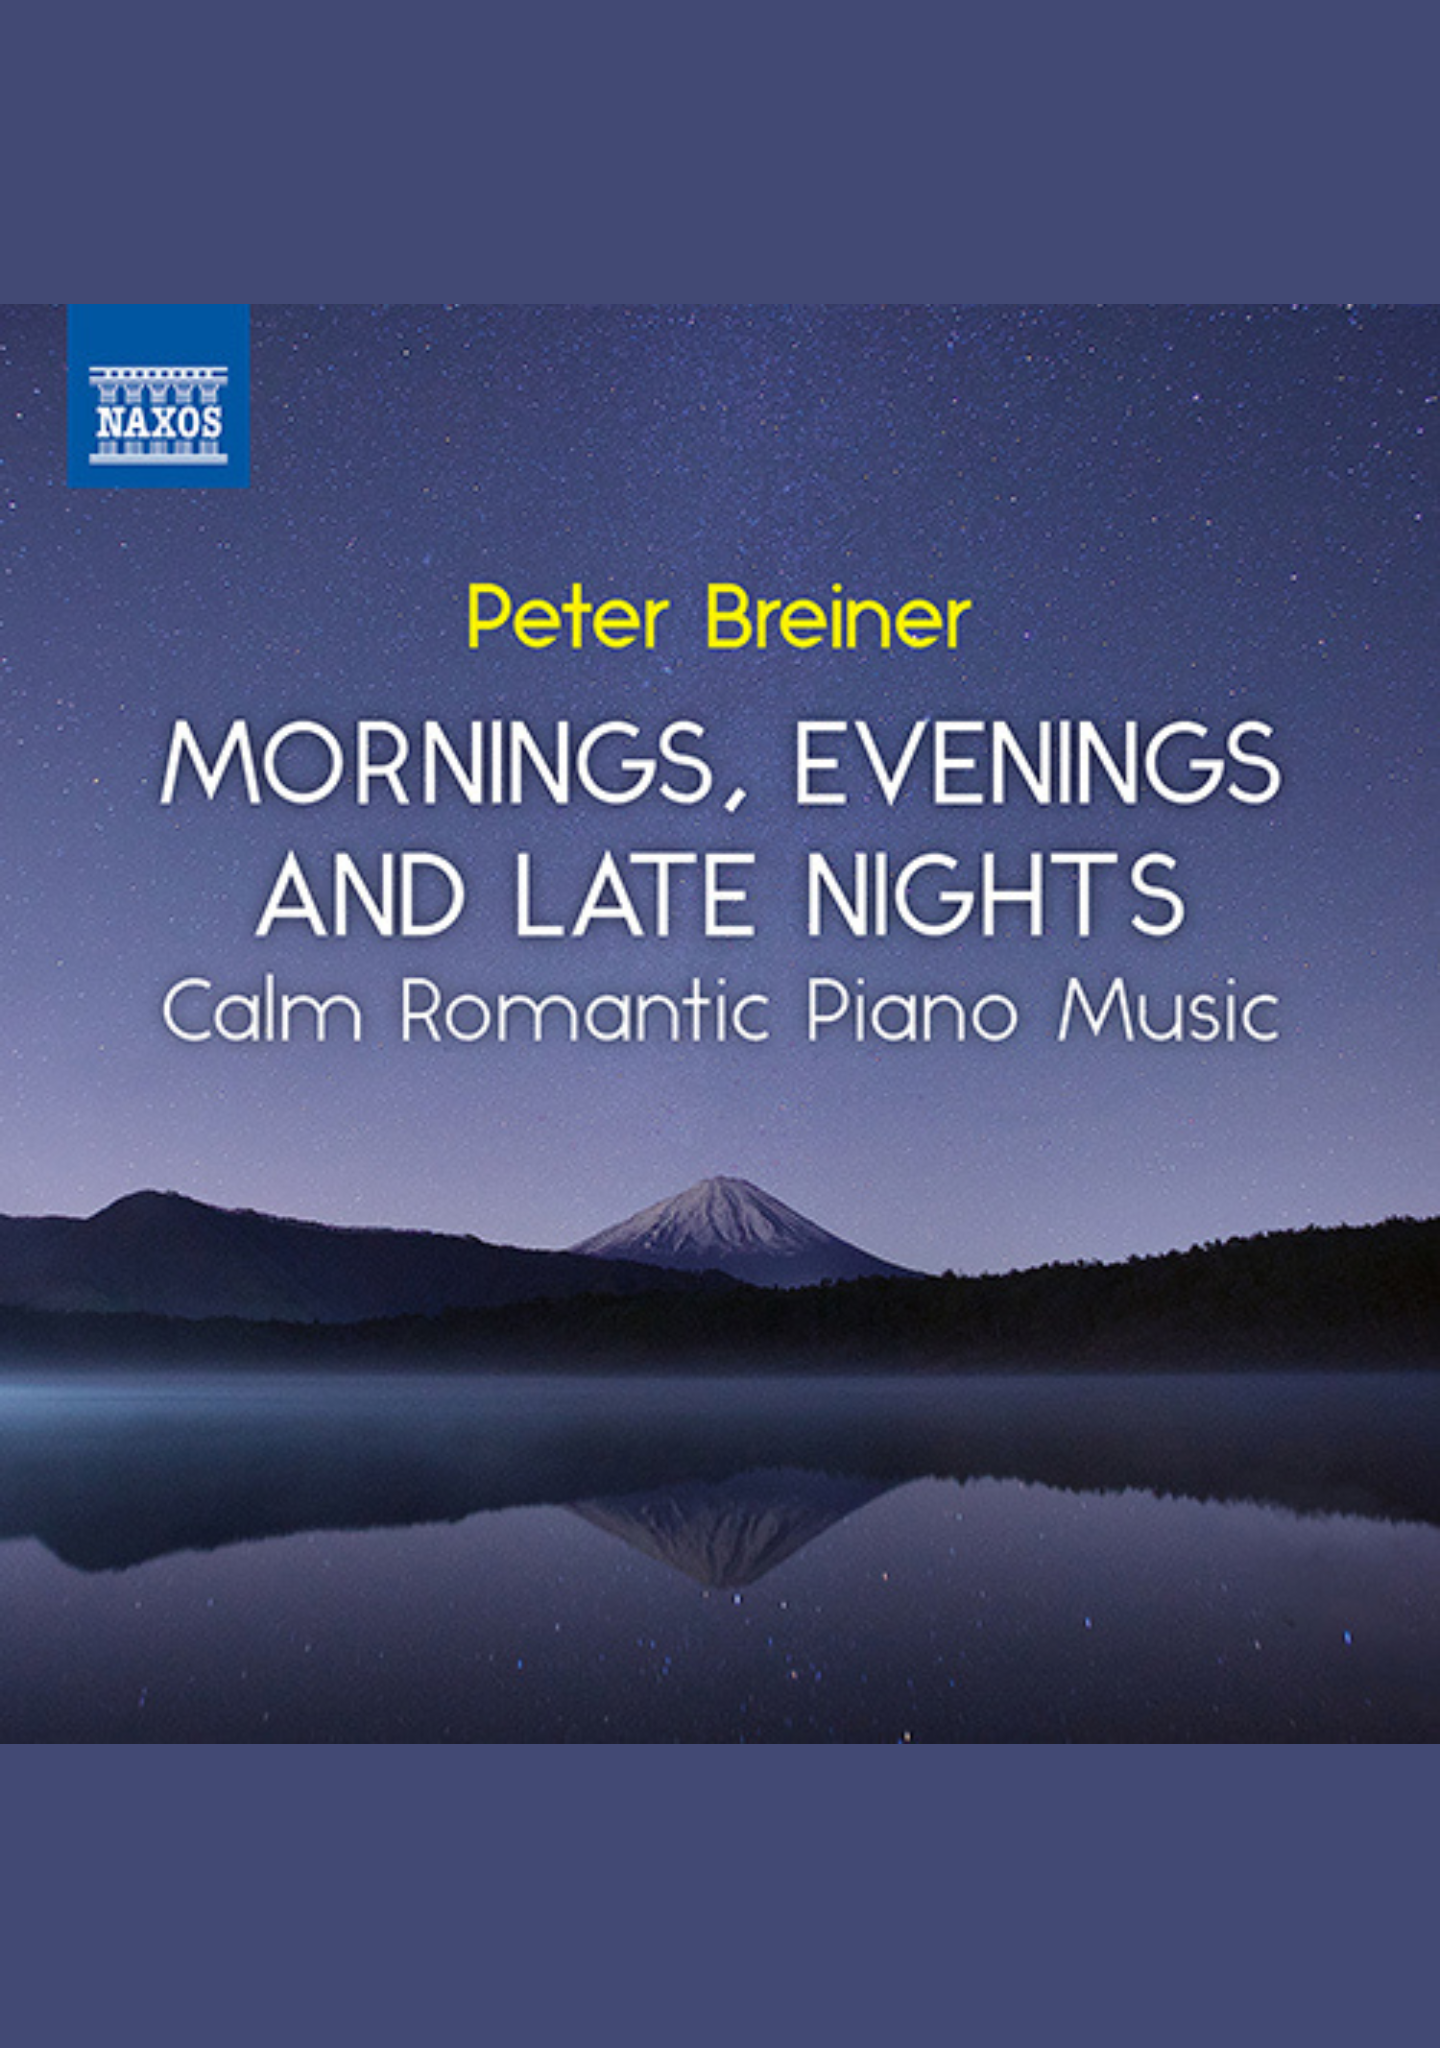 Mornings, Evenings and Late Nights – Calm Romantic Piano Music by Peter Breiner (PB150)